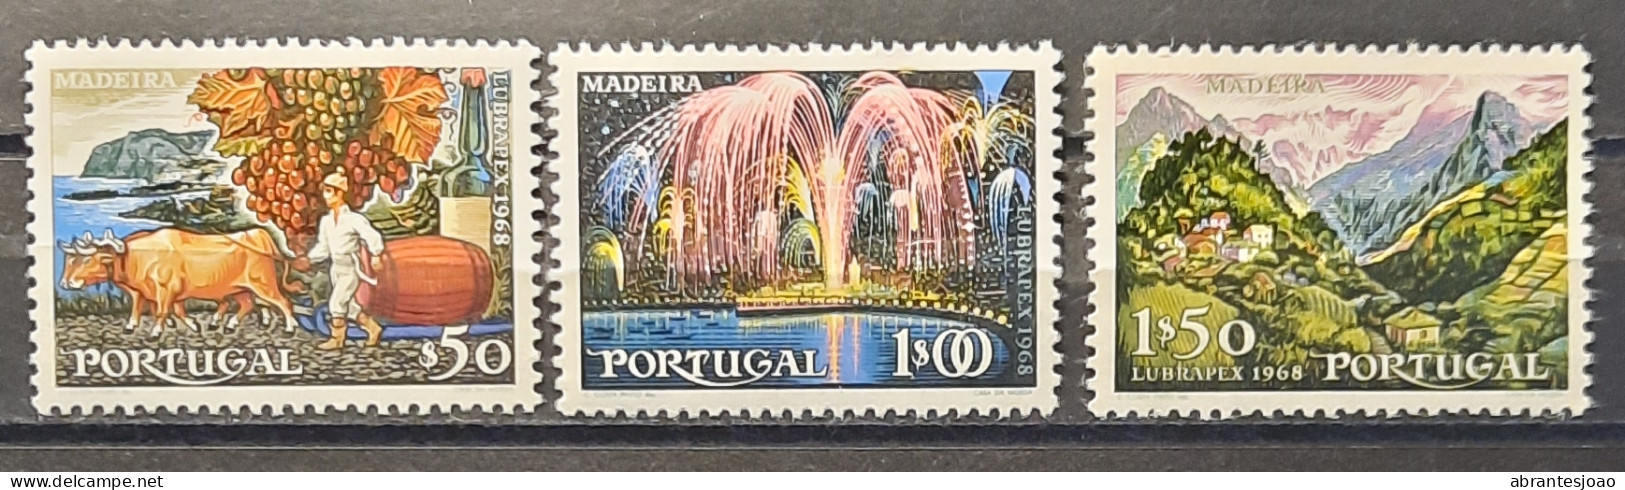 1698 - Portugal - LUBRAPEX Madeira - 7 Stamps - Used Stamps